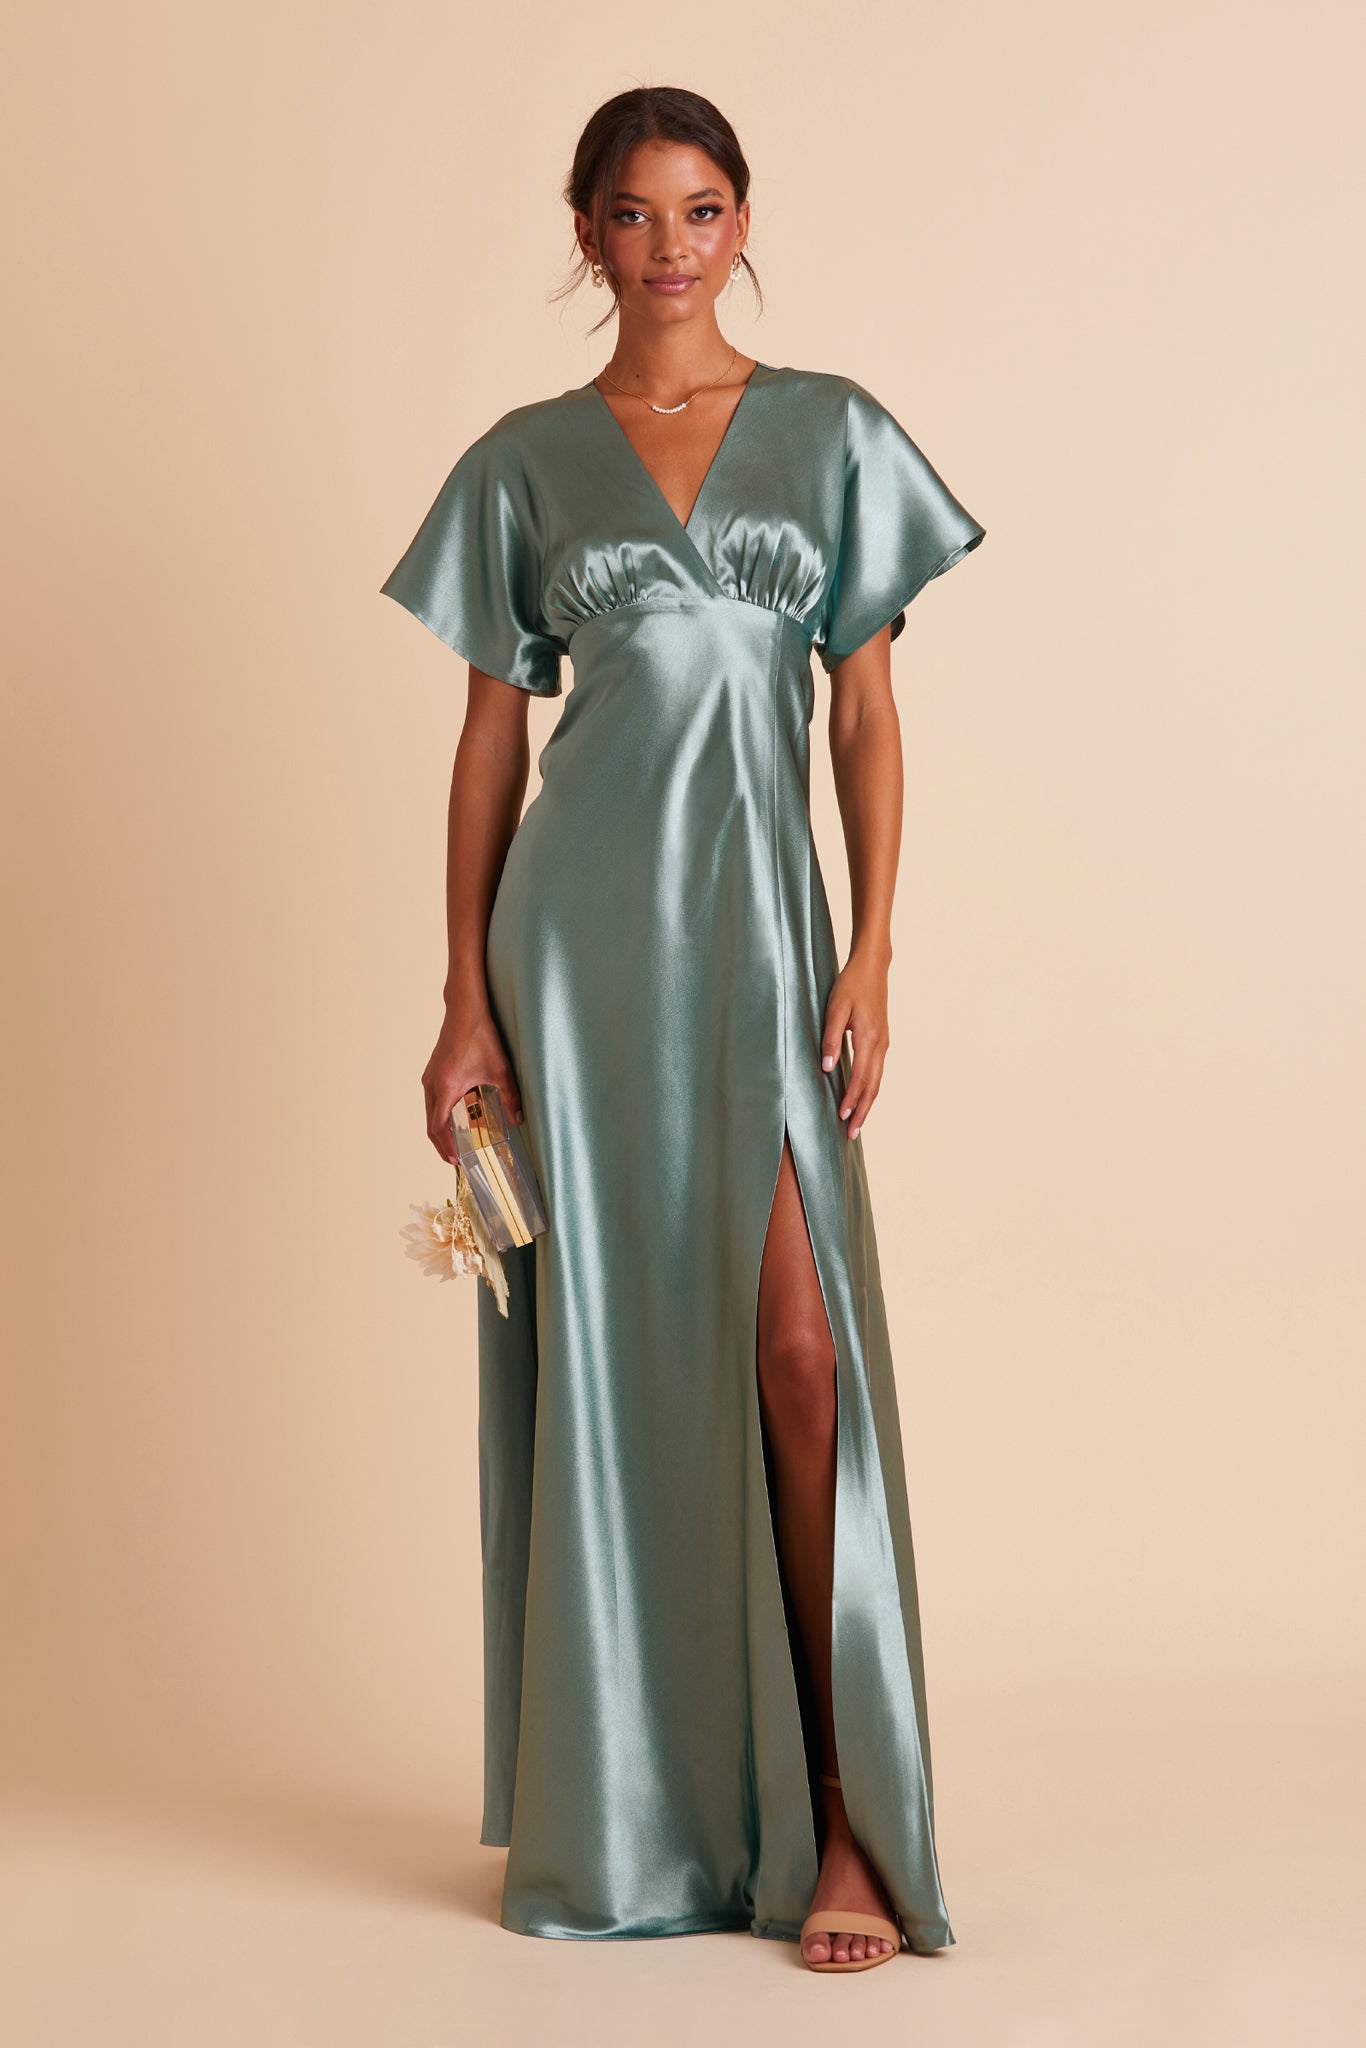 Jesse bridesmaid dress with slit in sea glass green satin by Birdy Grey, front view